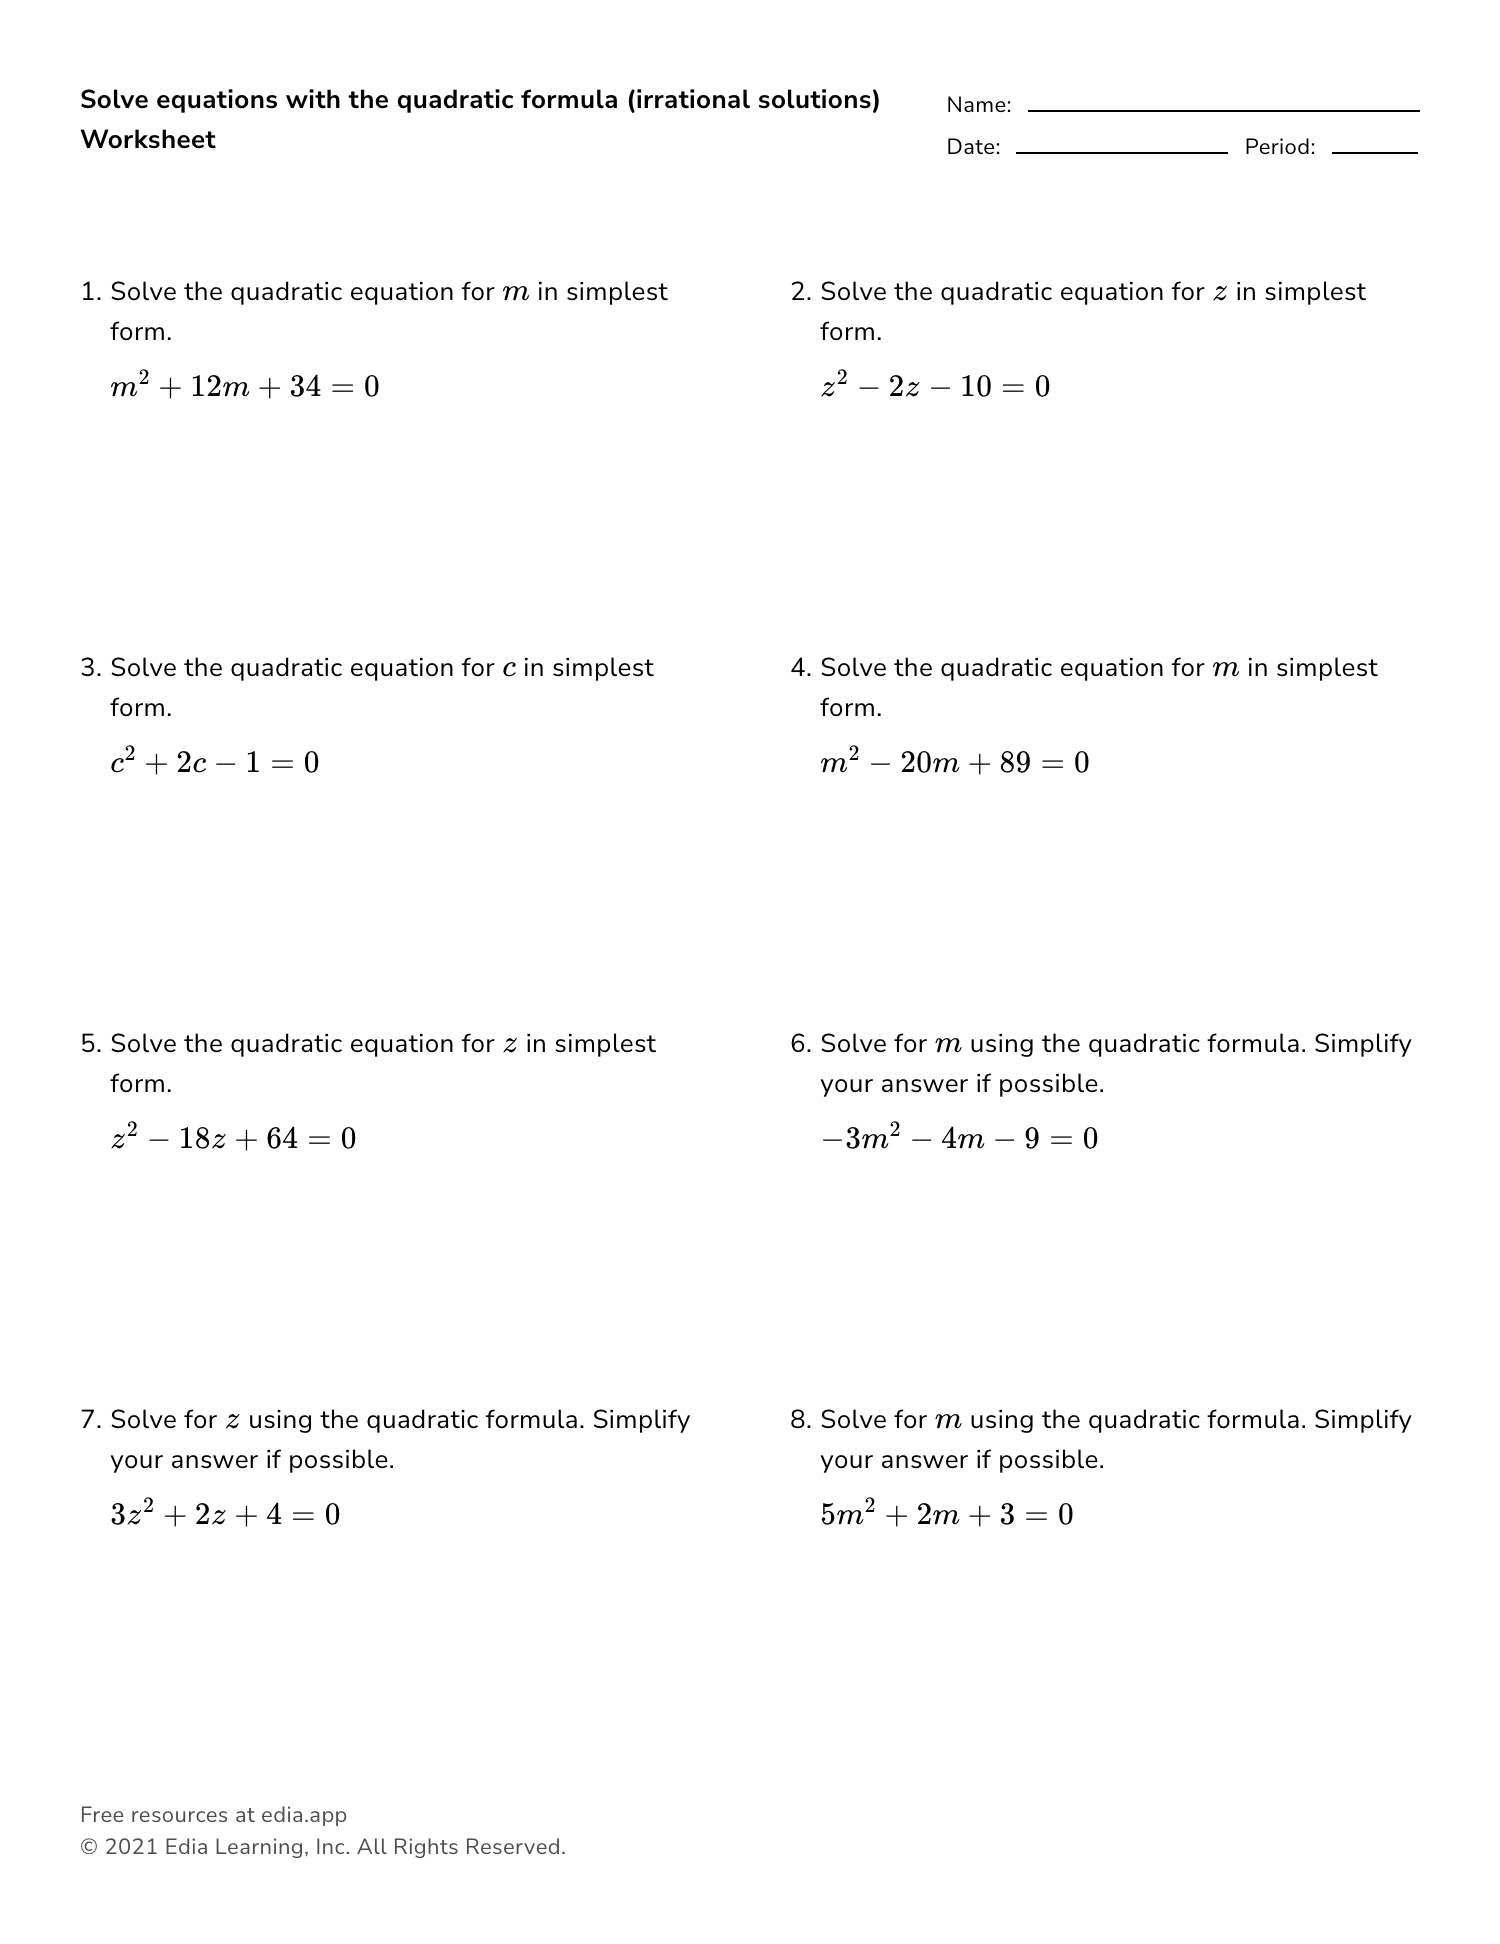 Solve Equations With The Quadratic Formula (irrational Solutions Throughout Solving Quadratic Equations Worksheet